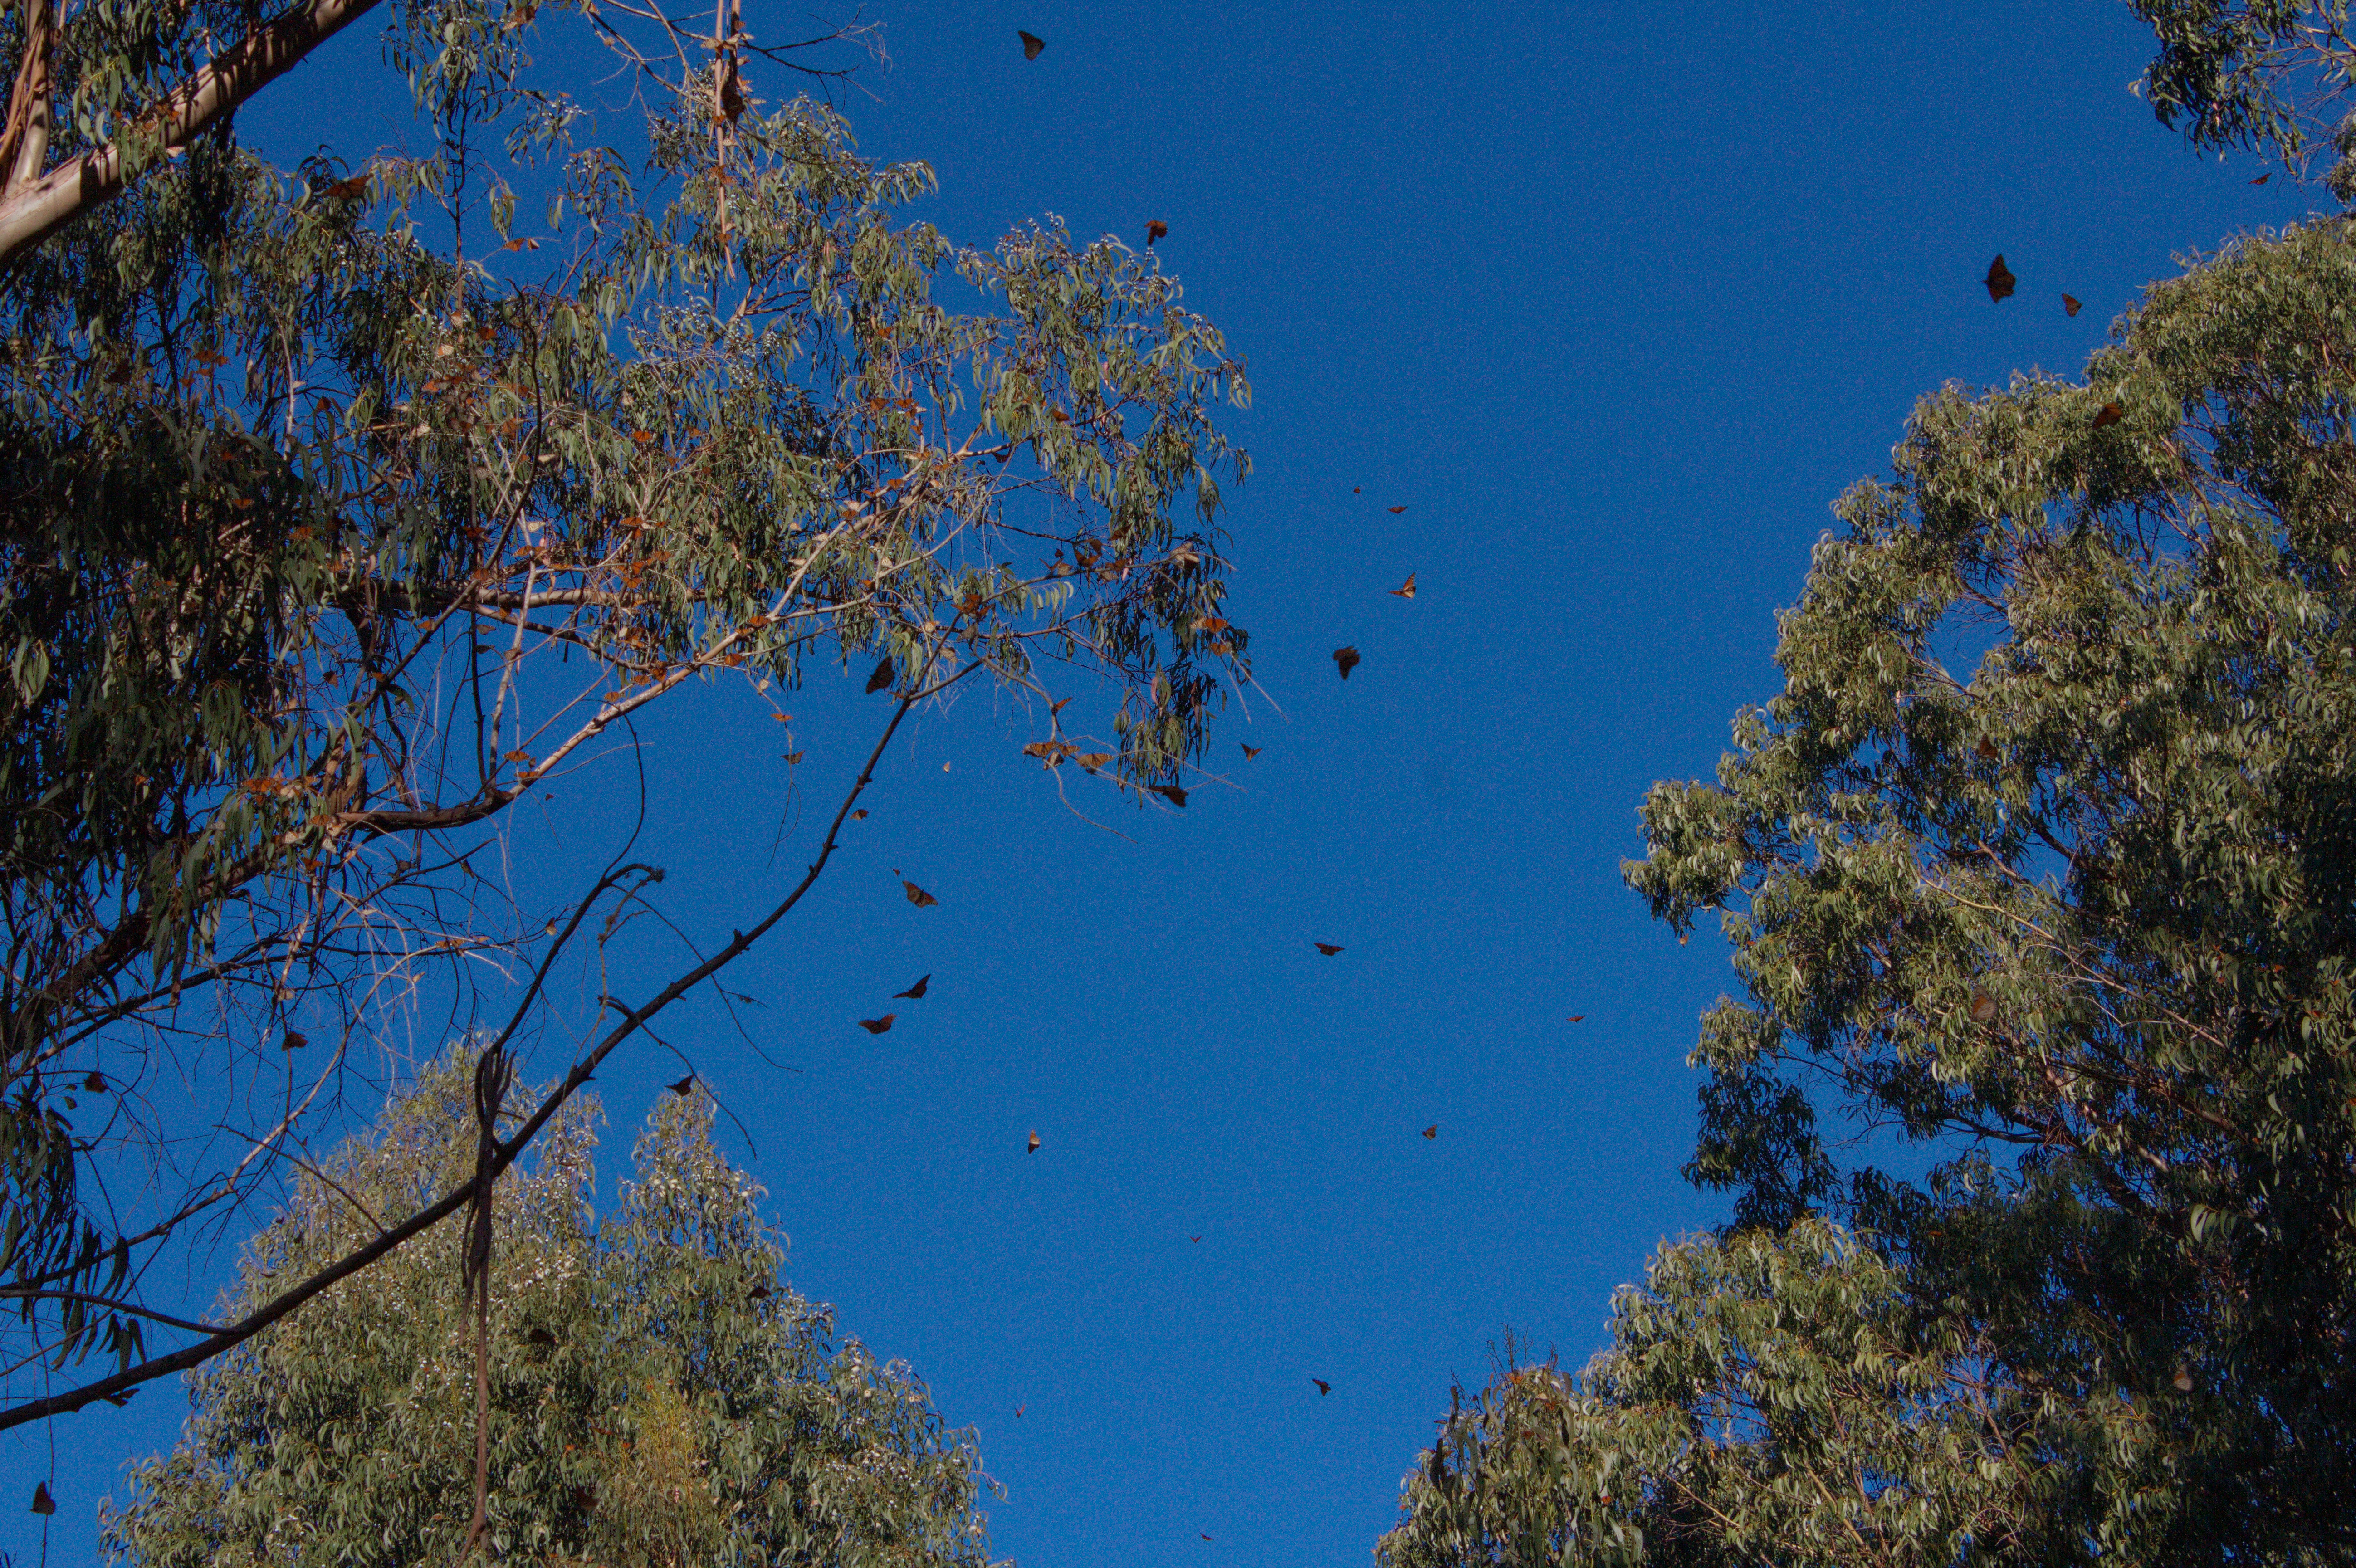 In this upward-facing image, trees laden with monarchs stand against a deep blue sky. Some bright orange monarchs are also shown in flight.